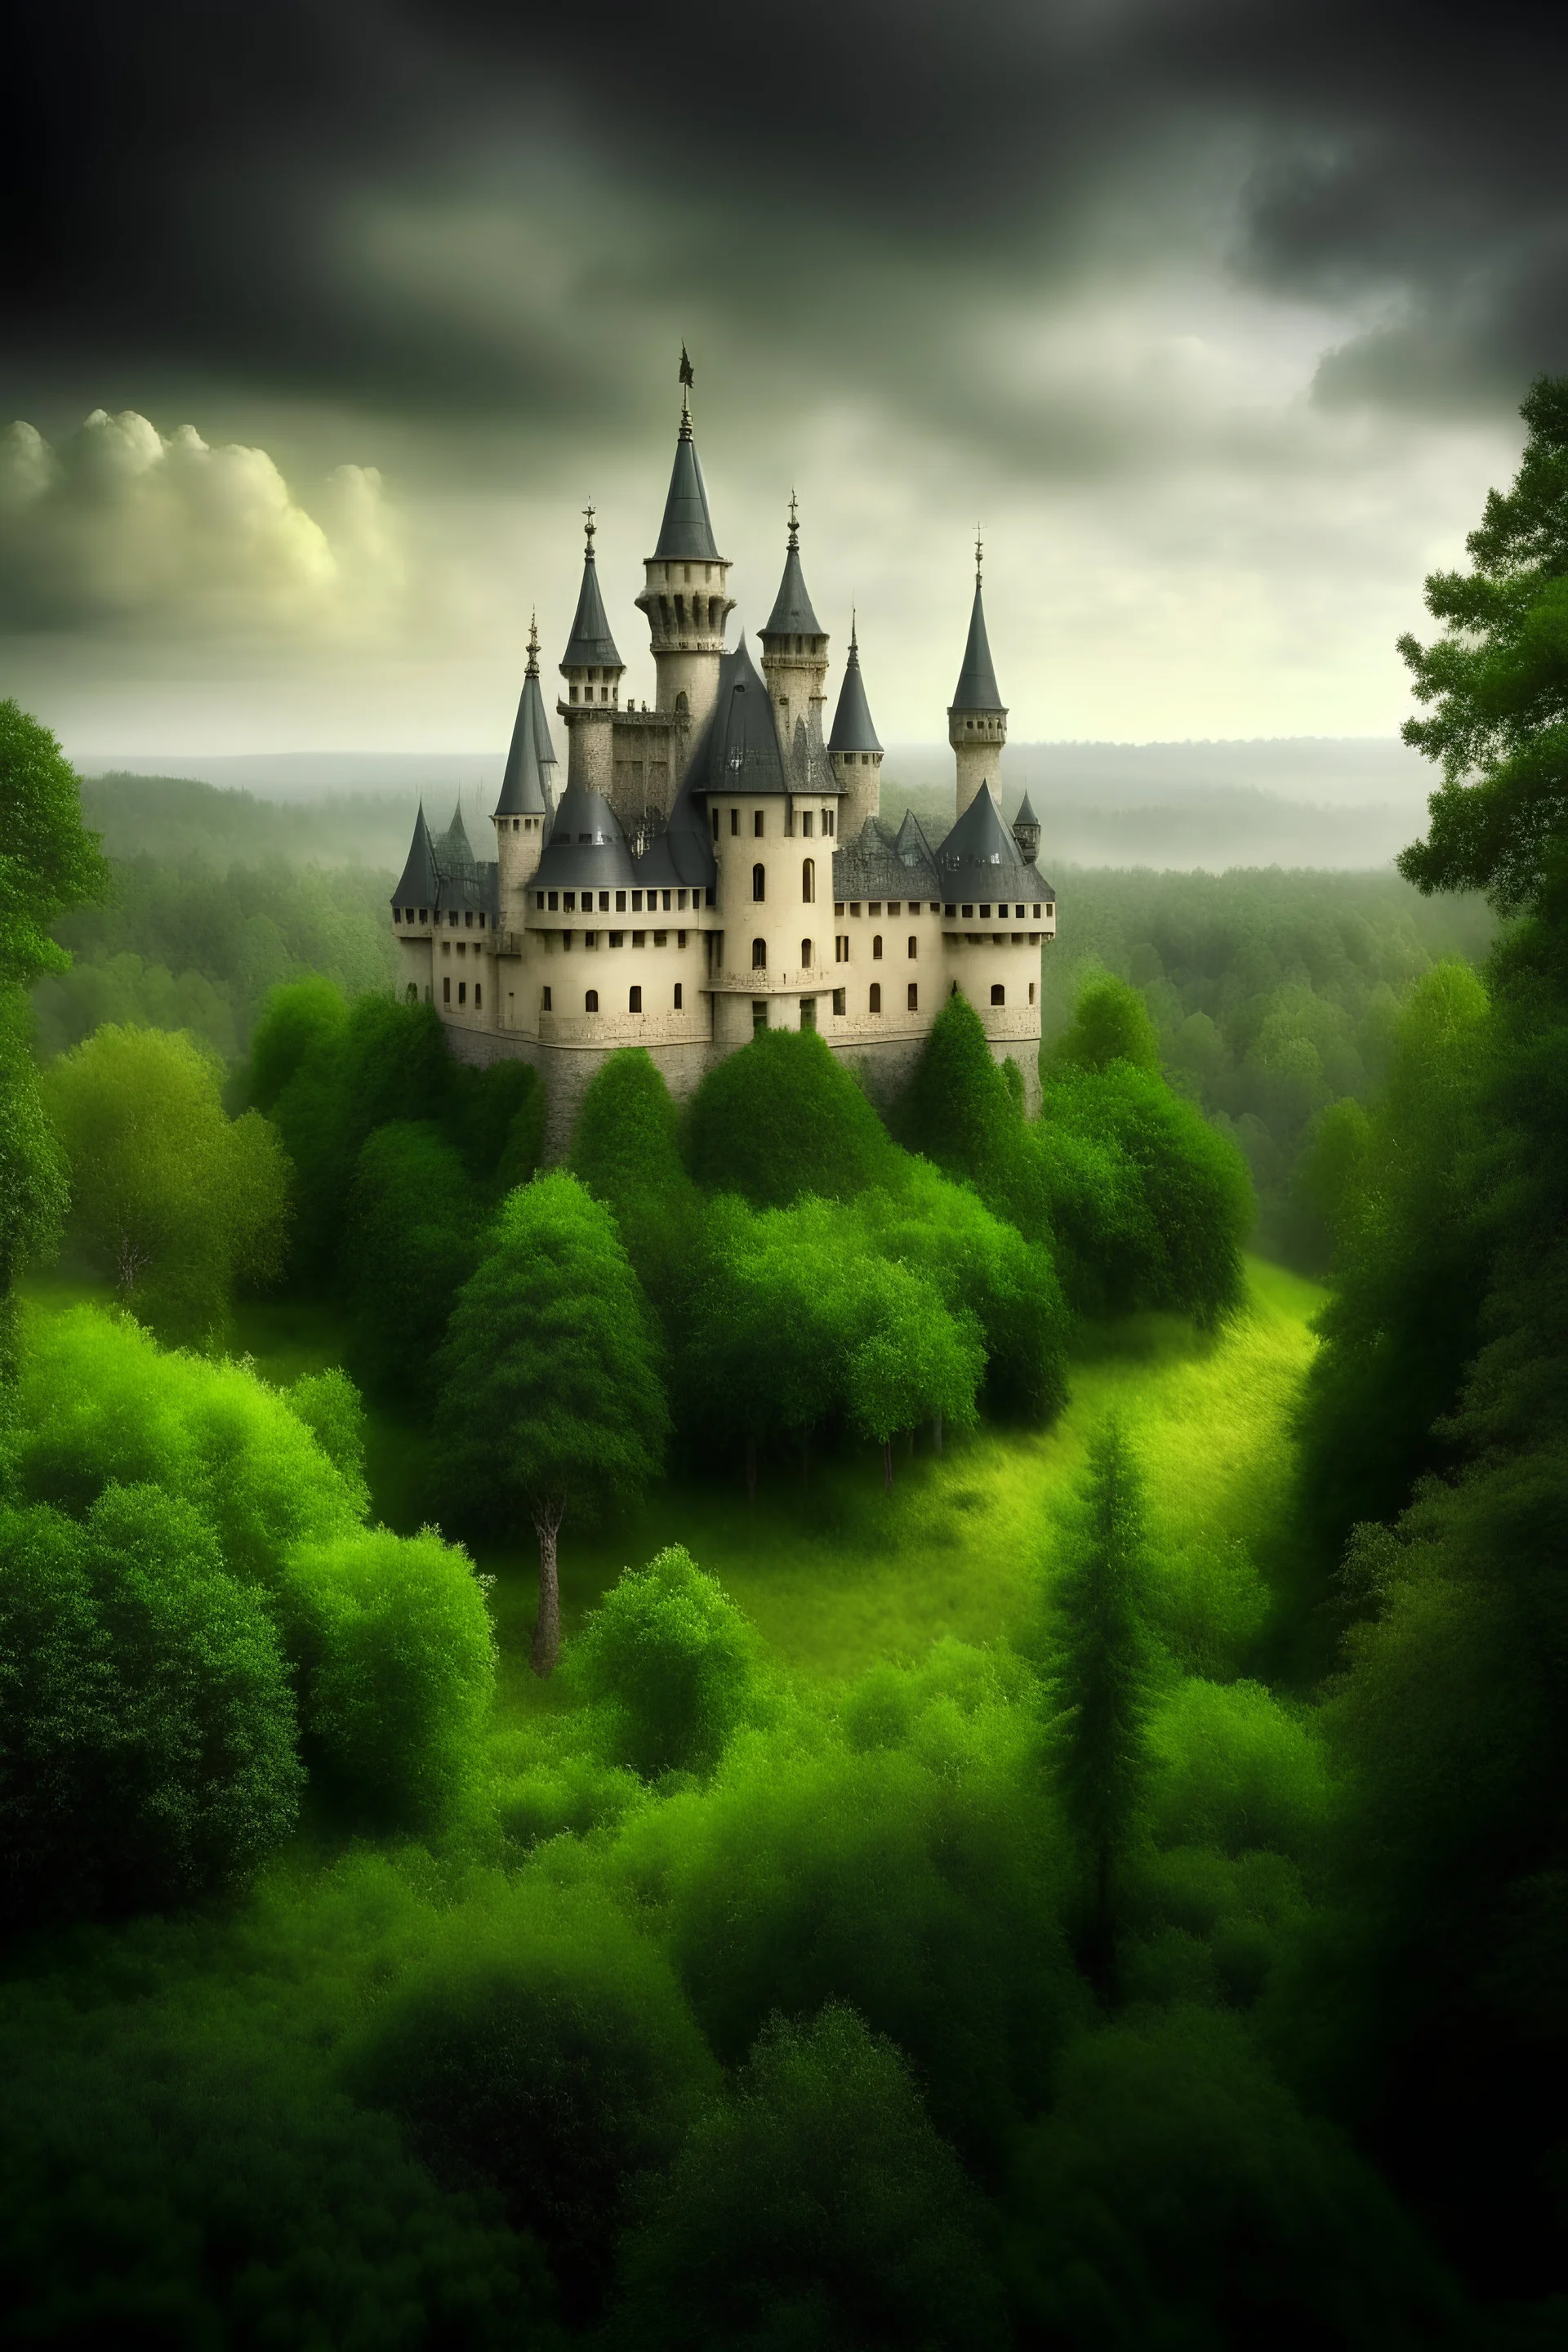 There is a castle around a forest